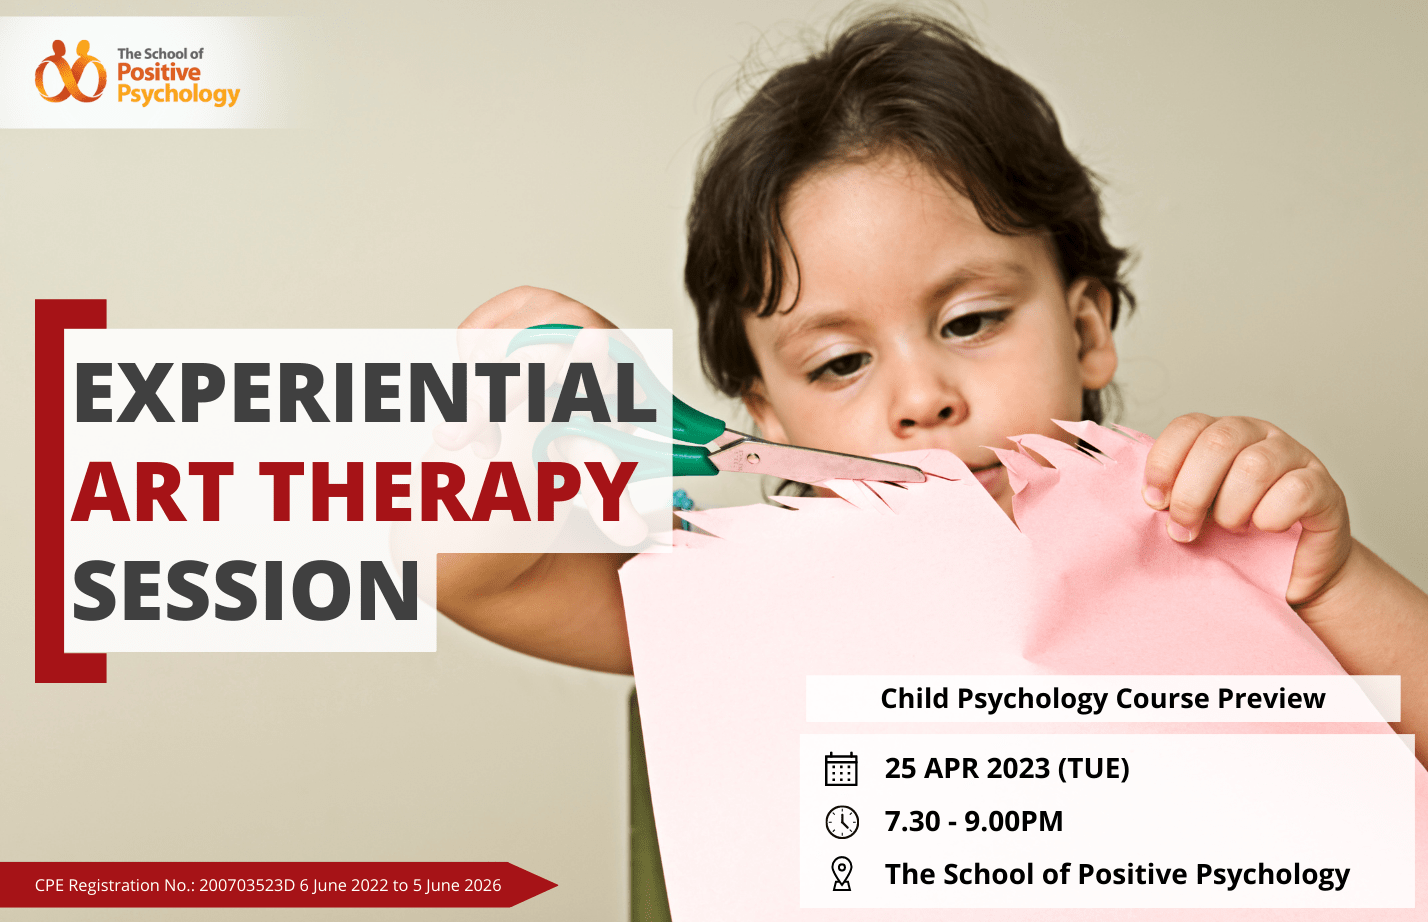 Experiential Art Therapy Session + Child Psychology Course Preview